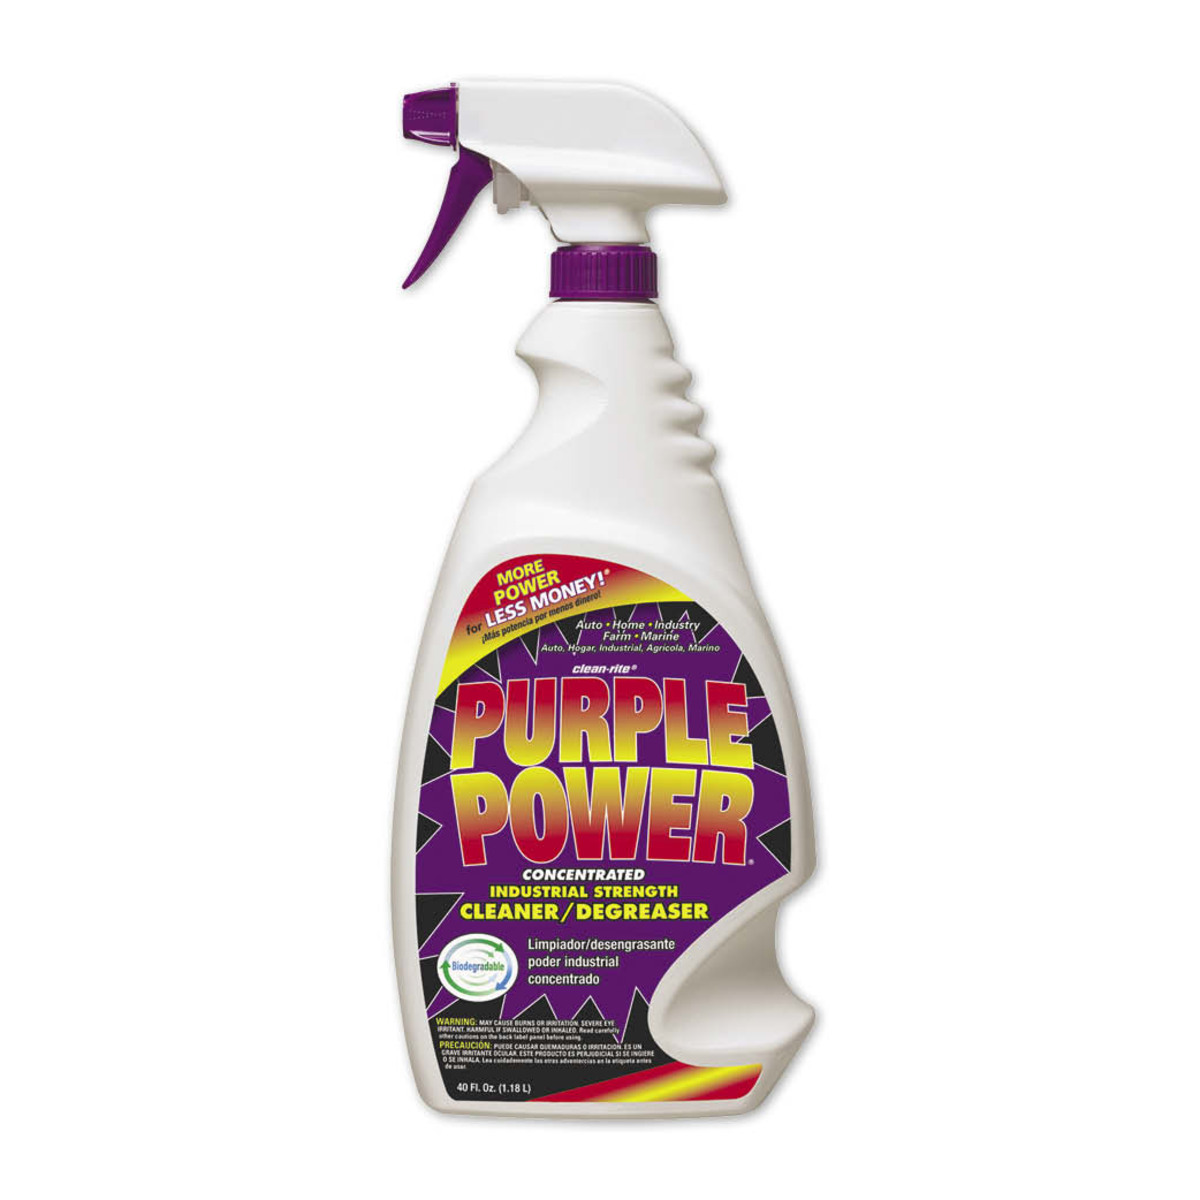 40 Oz. Purple Power Concentrated Cleaner/Degreaser - Gebo's